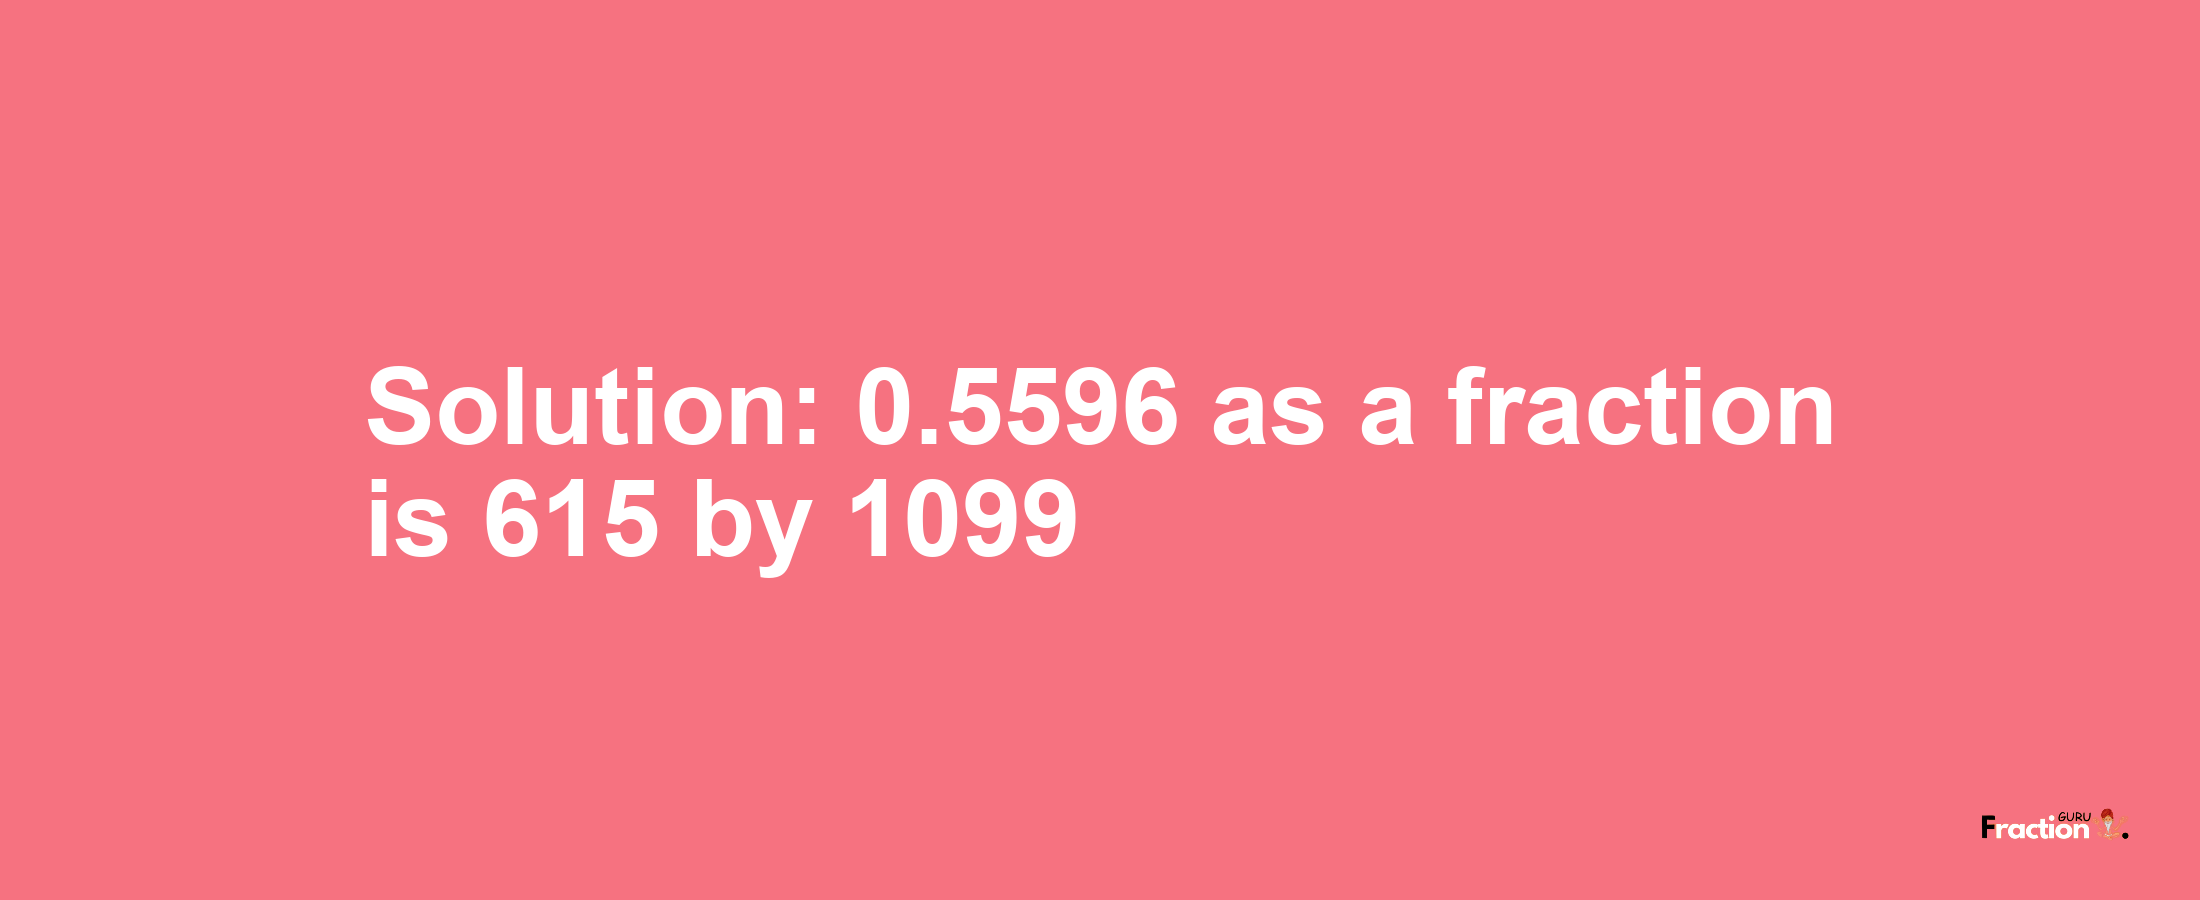 Solution:0.5596 as a fraction is 615/1099